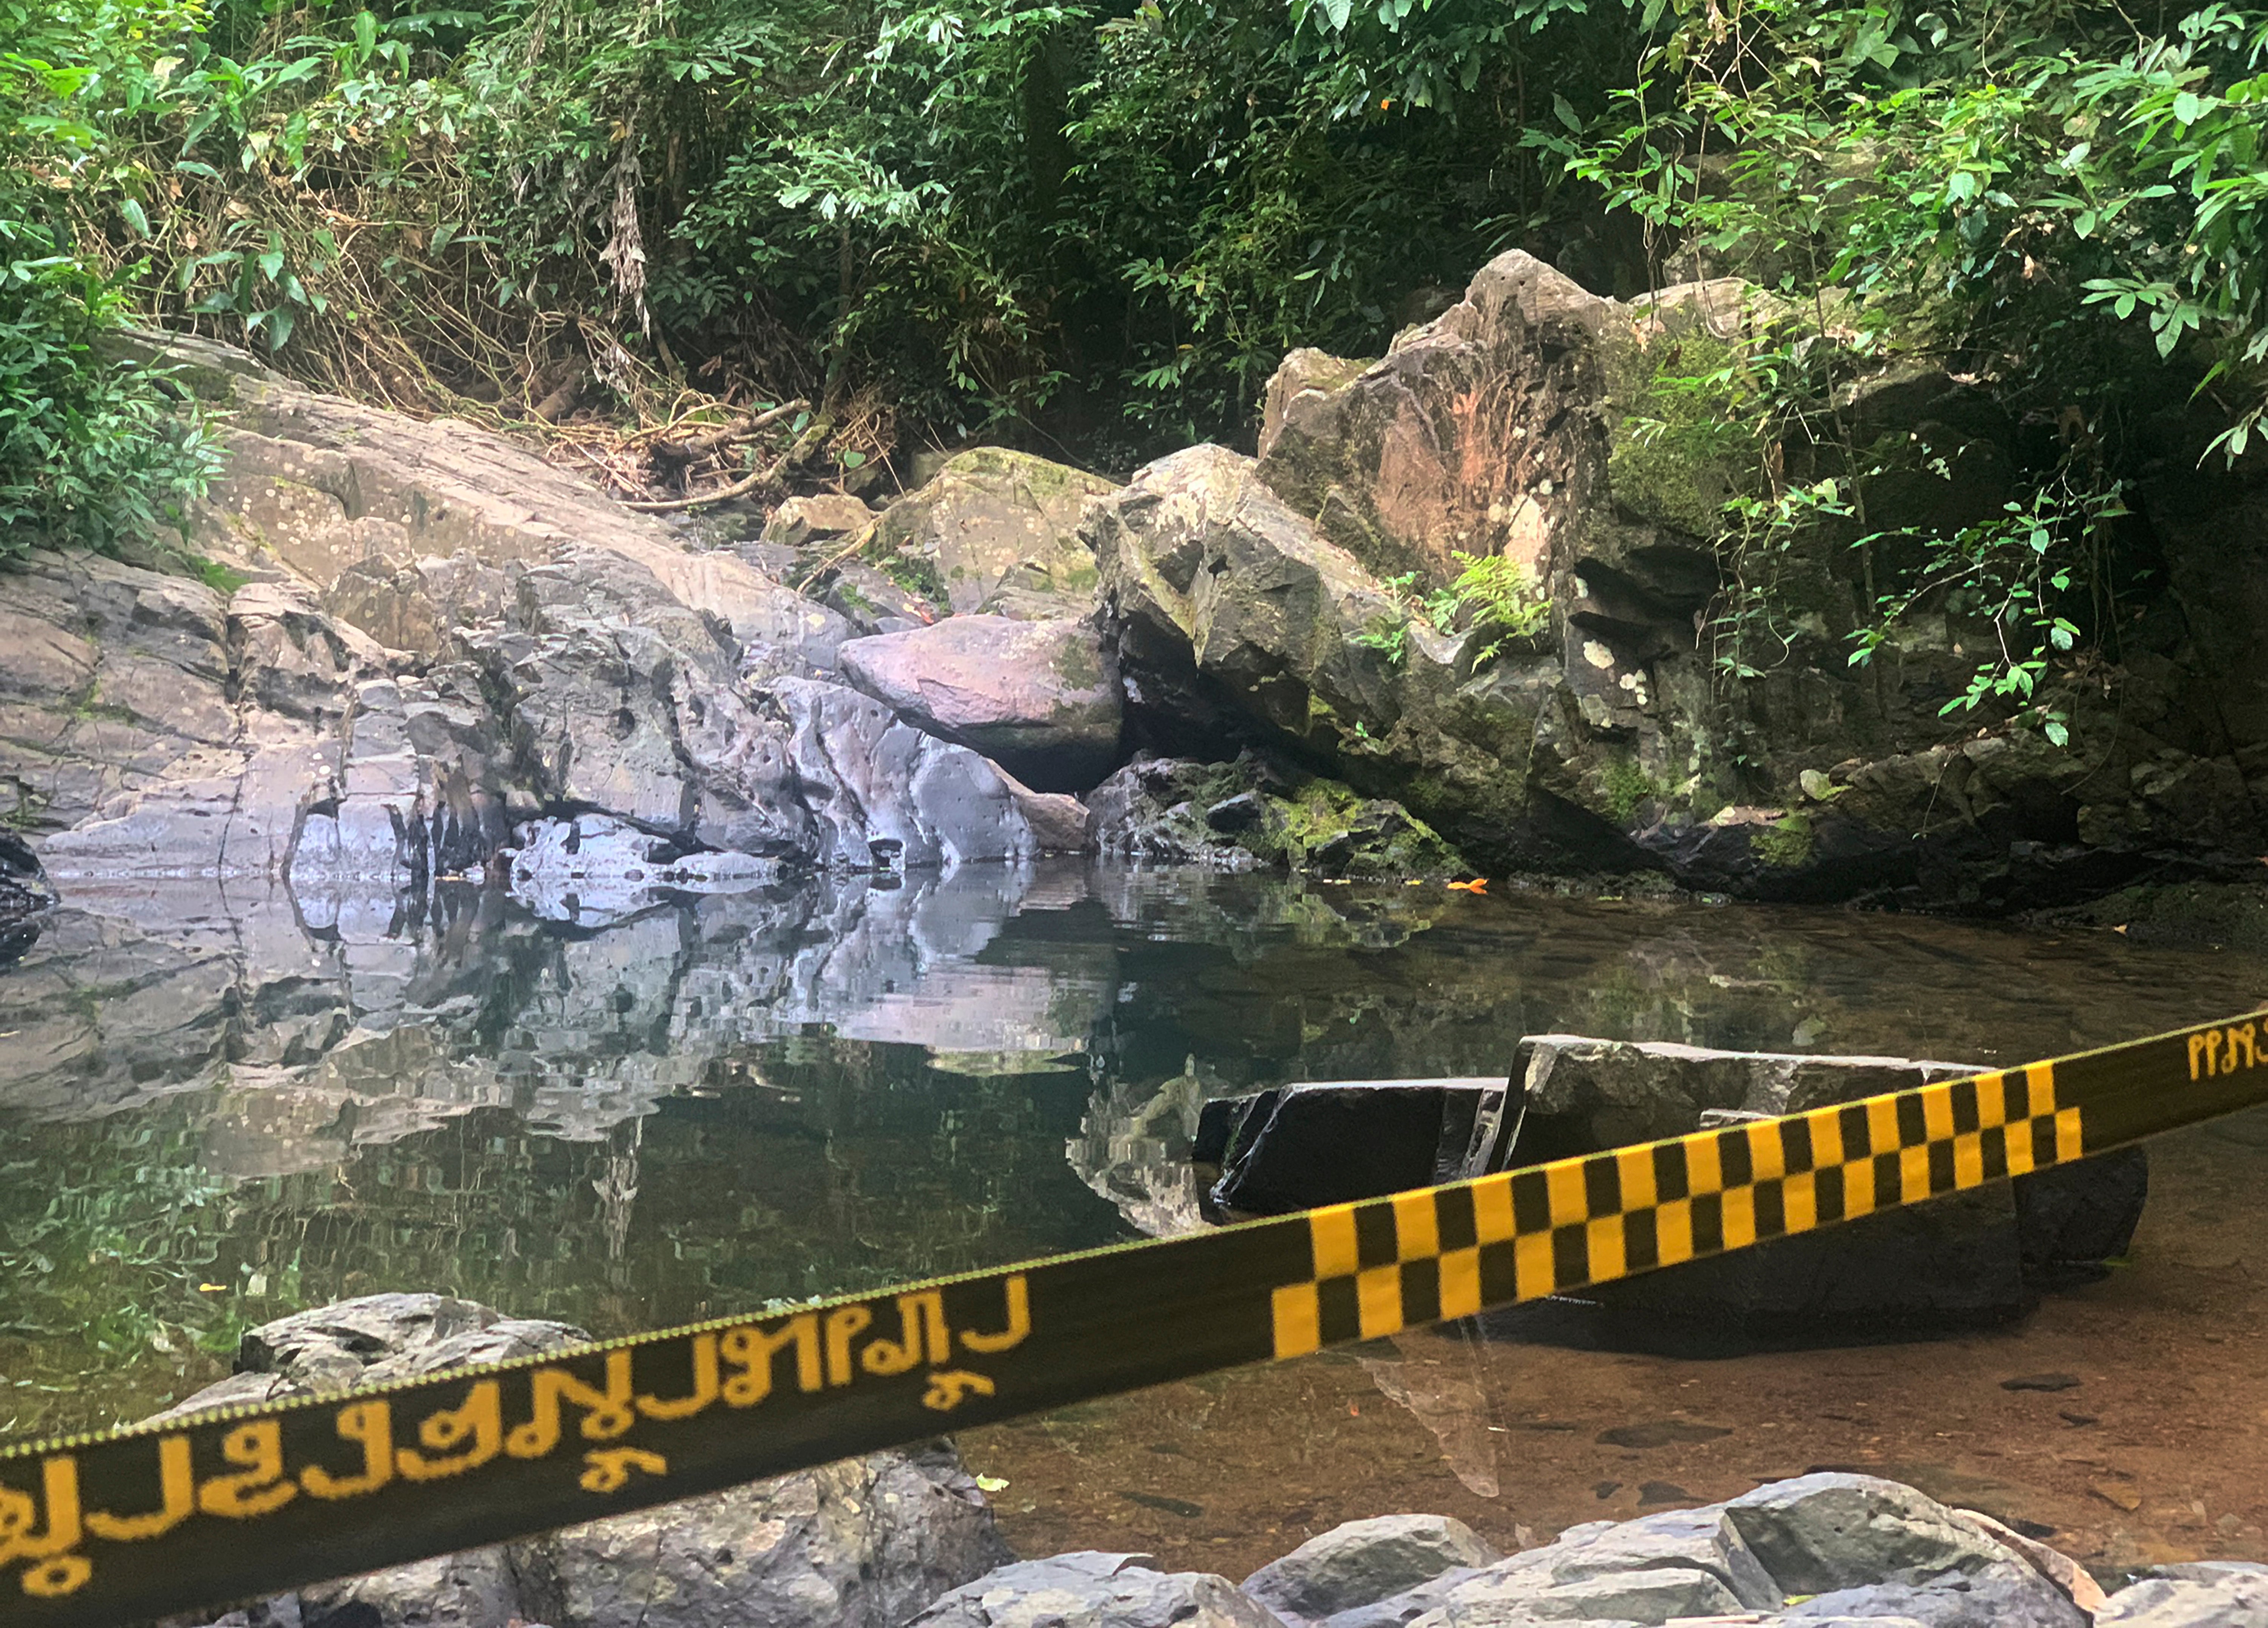 Police tape cordons off the area where a woman was found dead at a secluded spot in Phuket